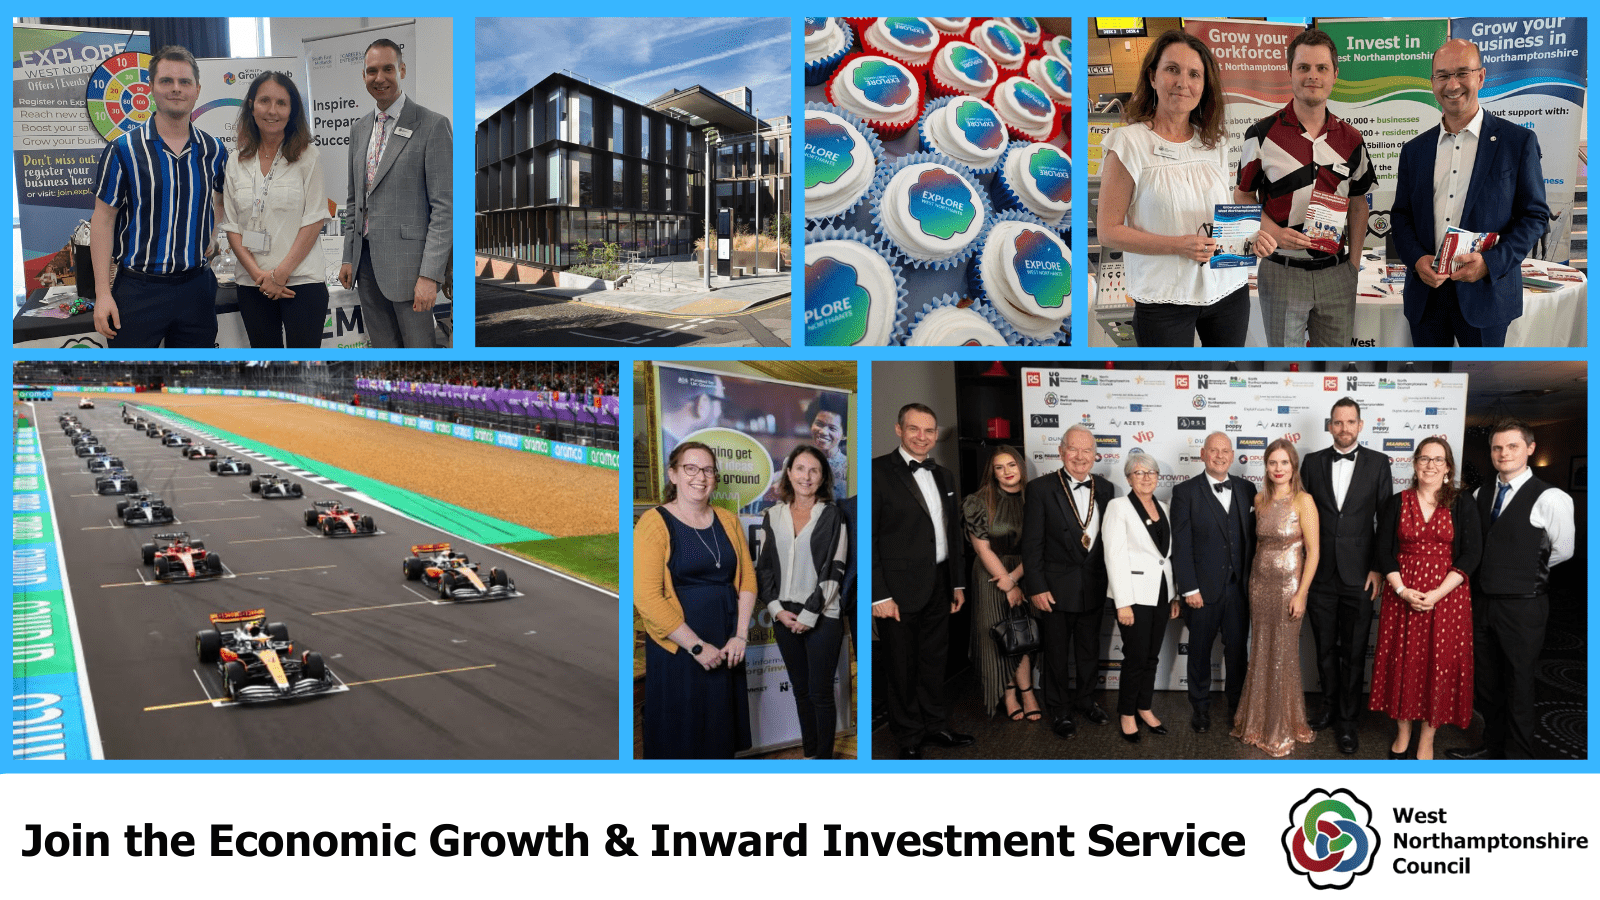 Join the Economic Growth & Inward Investment Service | Northamptonshire Chamber of Commerce